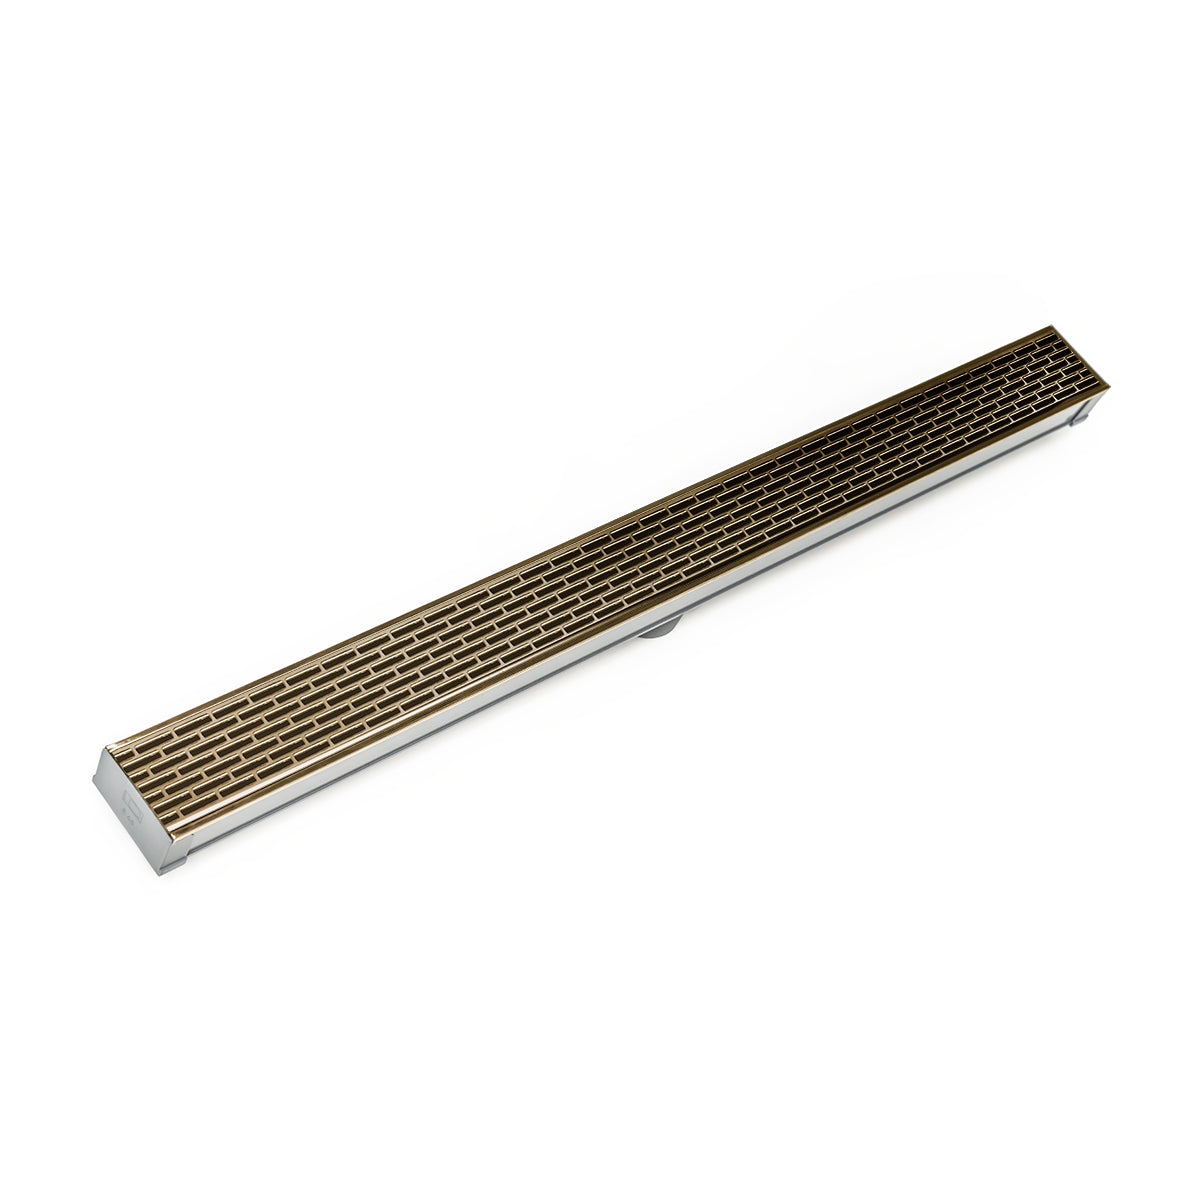 Infinity Drain 60" S-PVC Series Low Profile Site Sizable Linear Drain Kit with 2 1/2" Perforated Offset Slot Grate